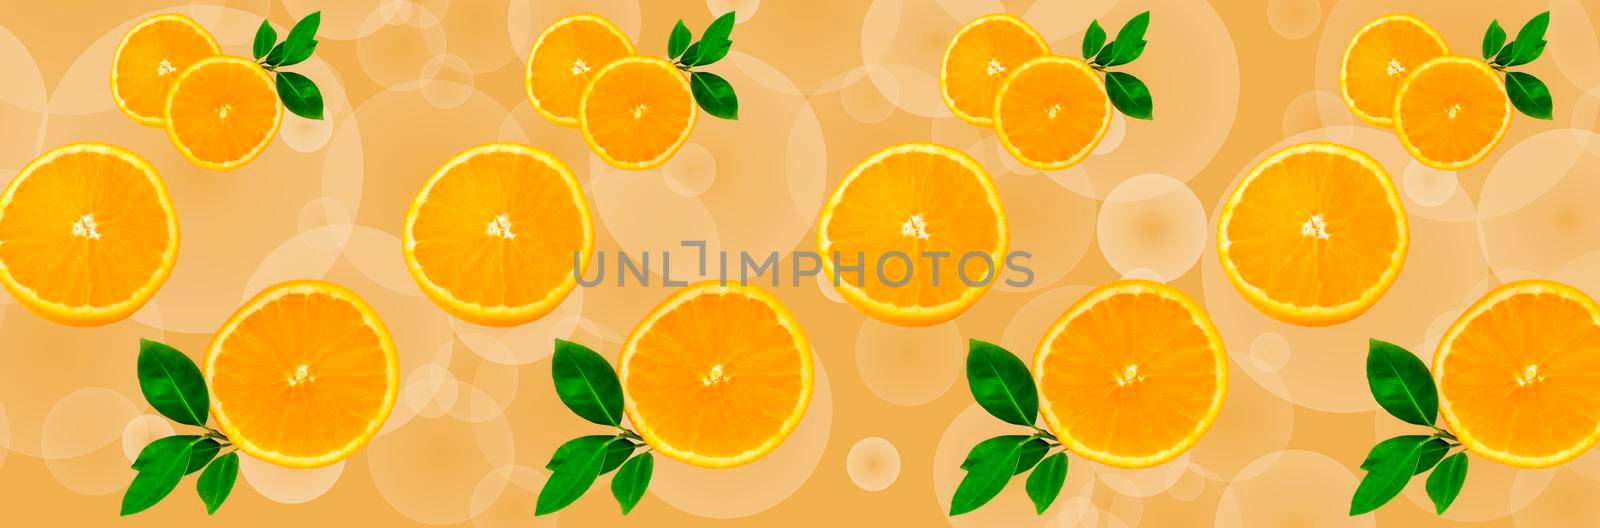 Sliced orange on a bright orange background. Oranges in the panoramic image. Panorama, a banner with space for text or insertion. Pieces of citrus fruit.  by Alina_Lebed